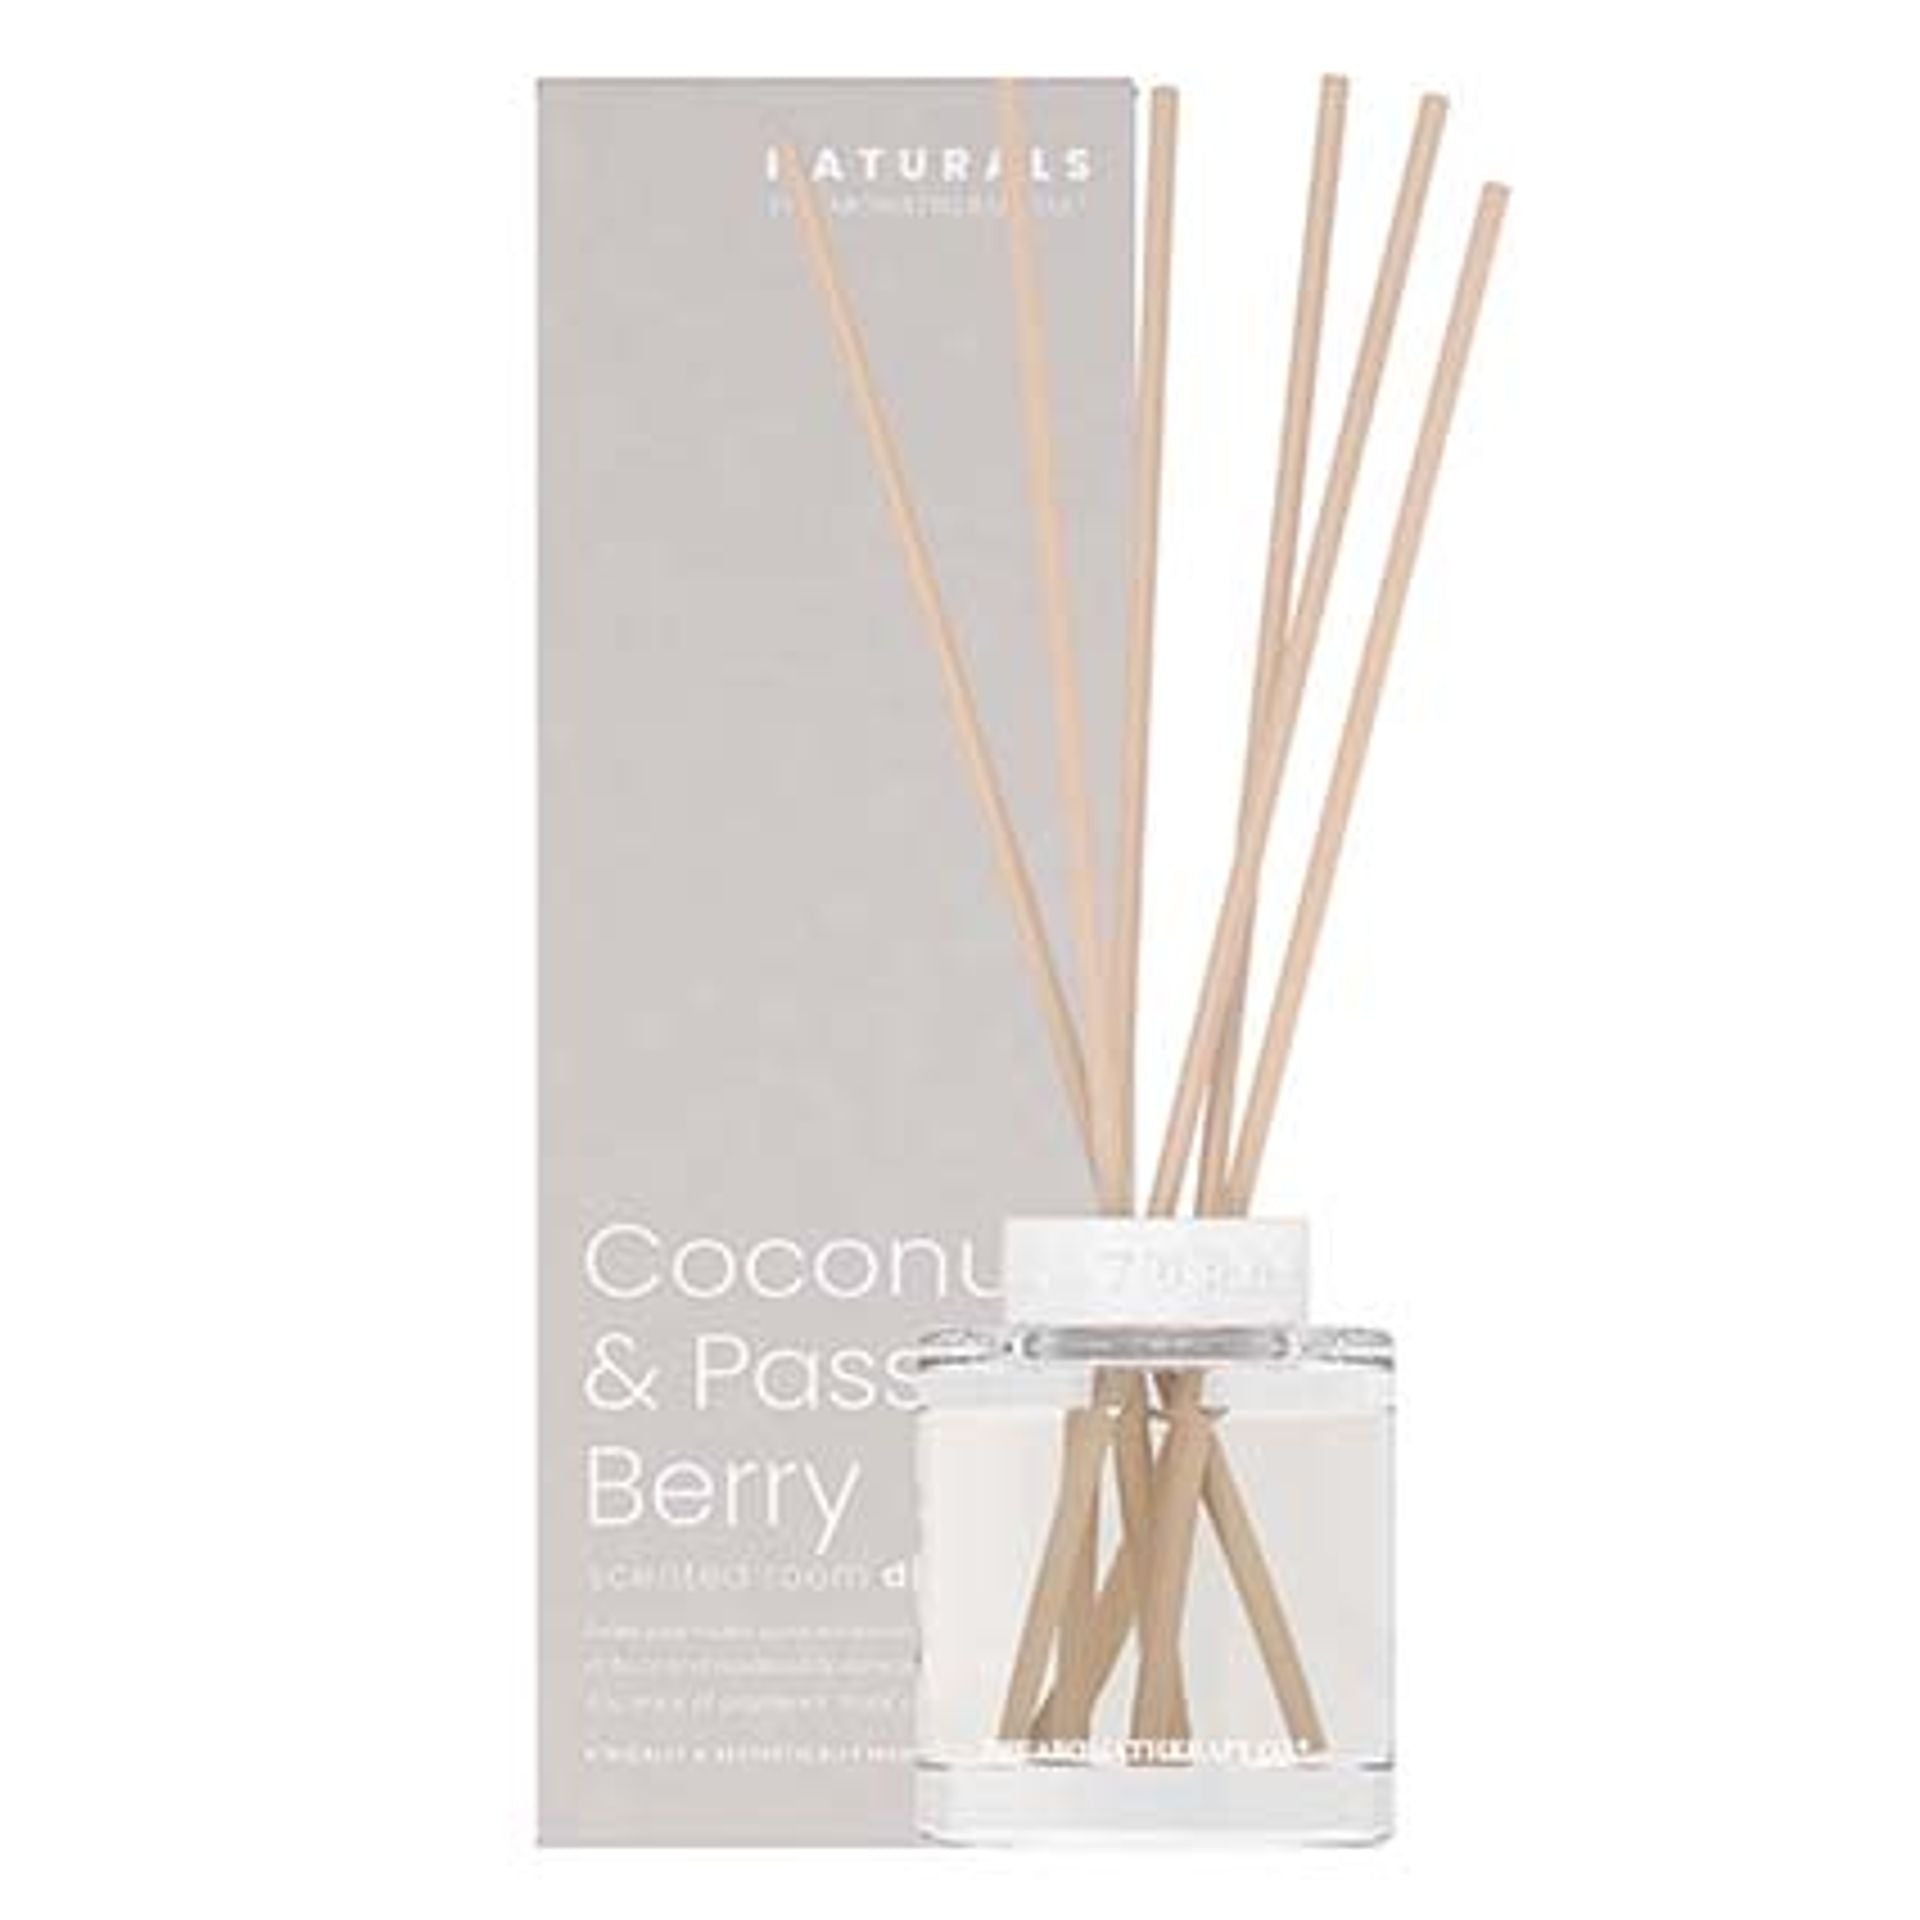 The Aromatherapy Co Naturals Coconut & Passion Berry Diffuser